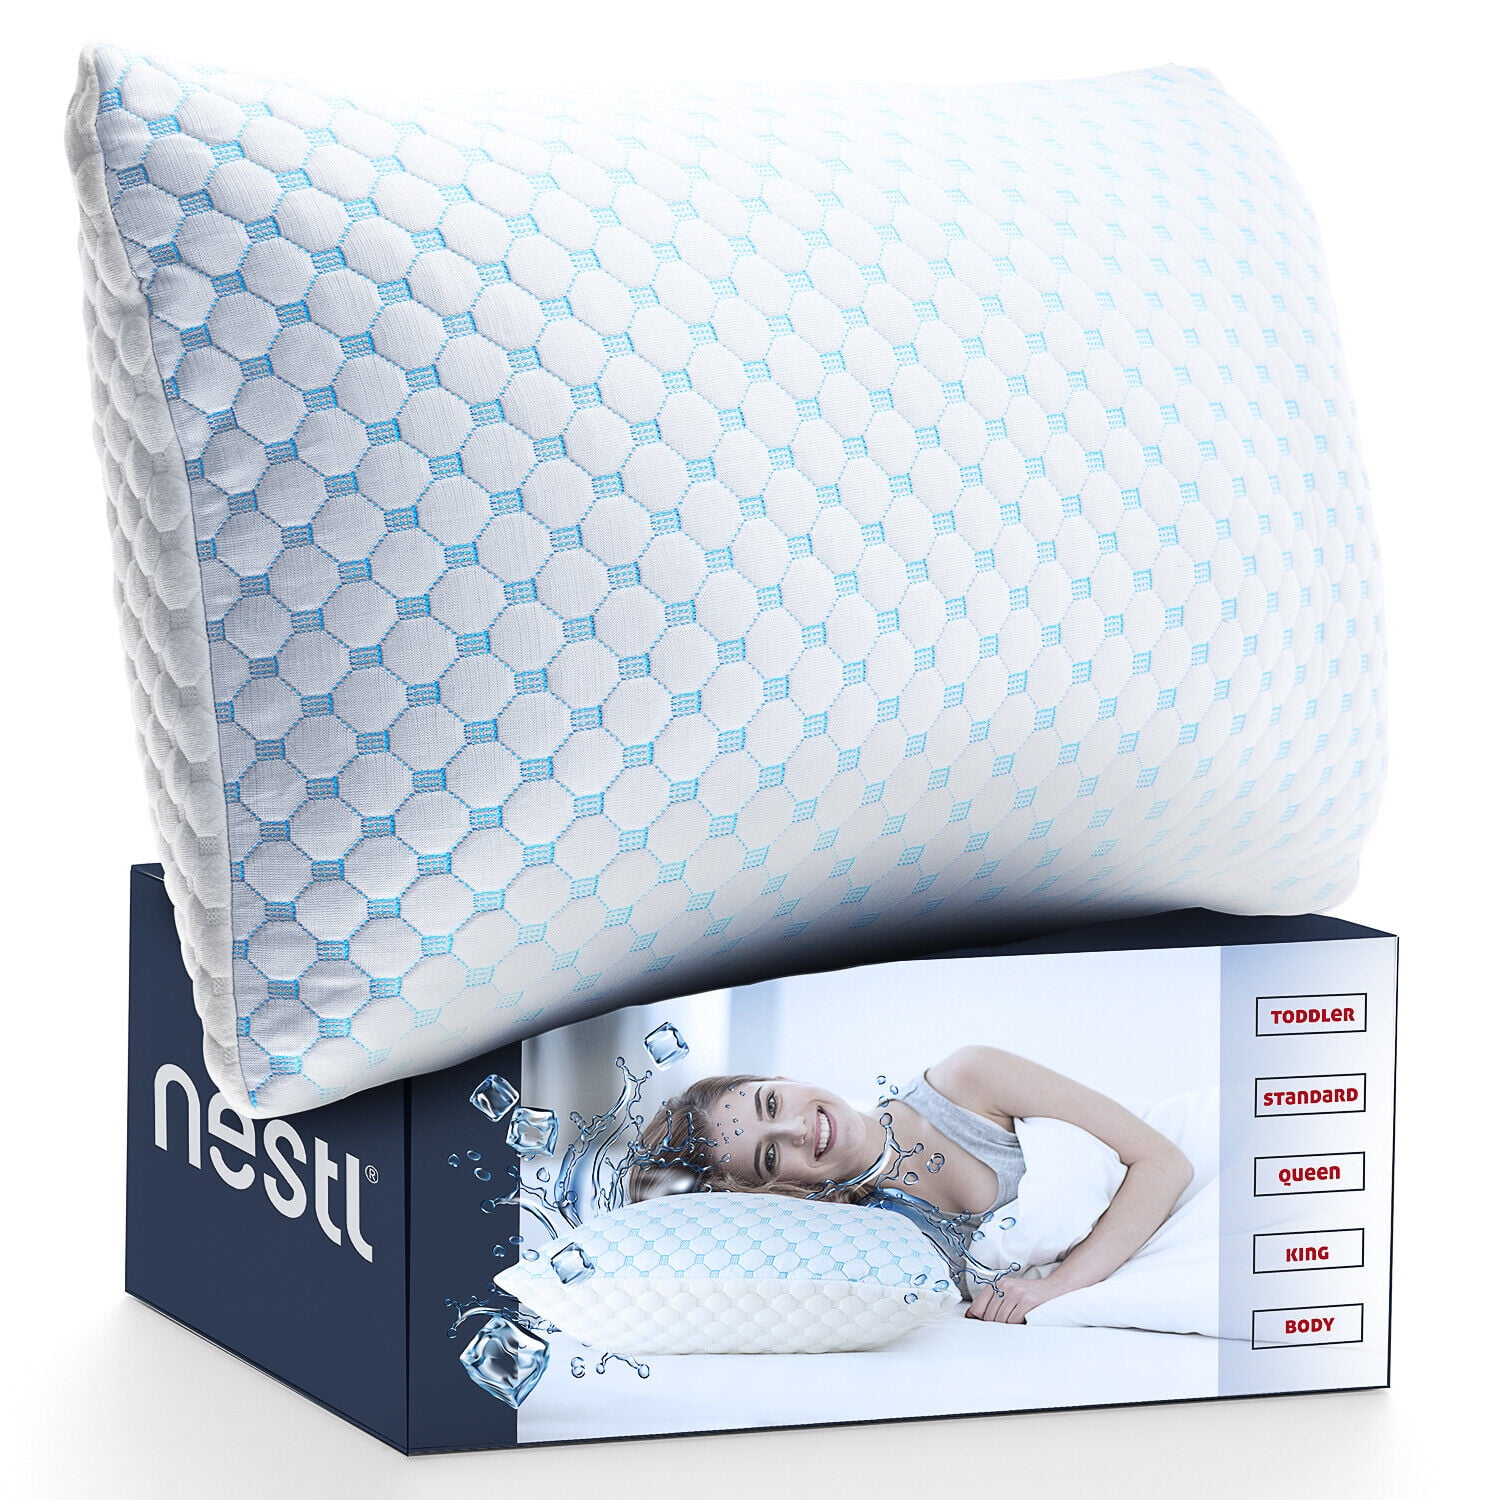 Memory Foam Pillows Queen Size Set of 4 - Cooling Bed Pillows for